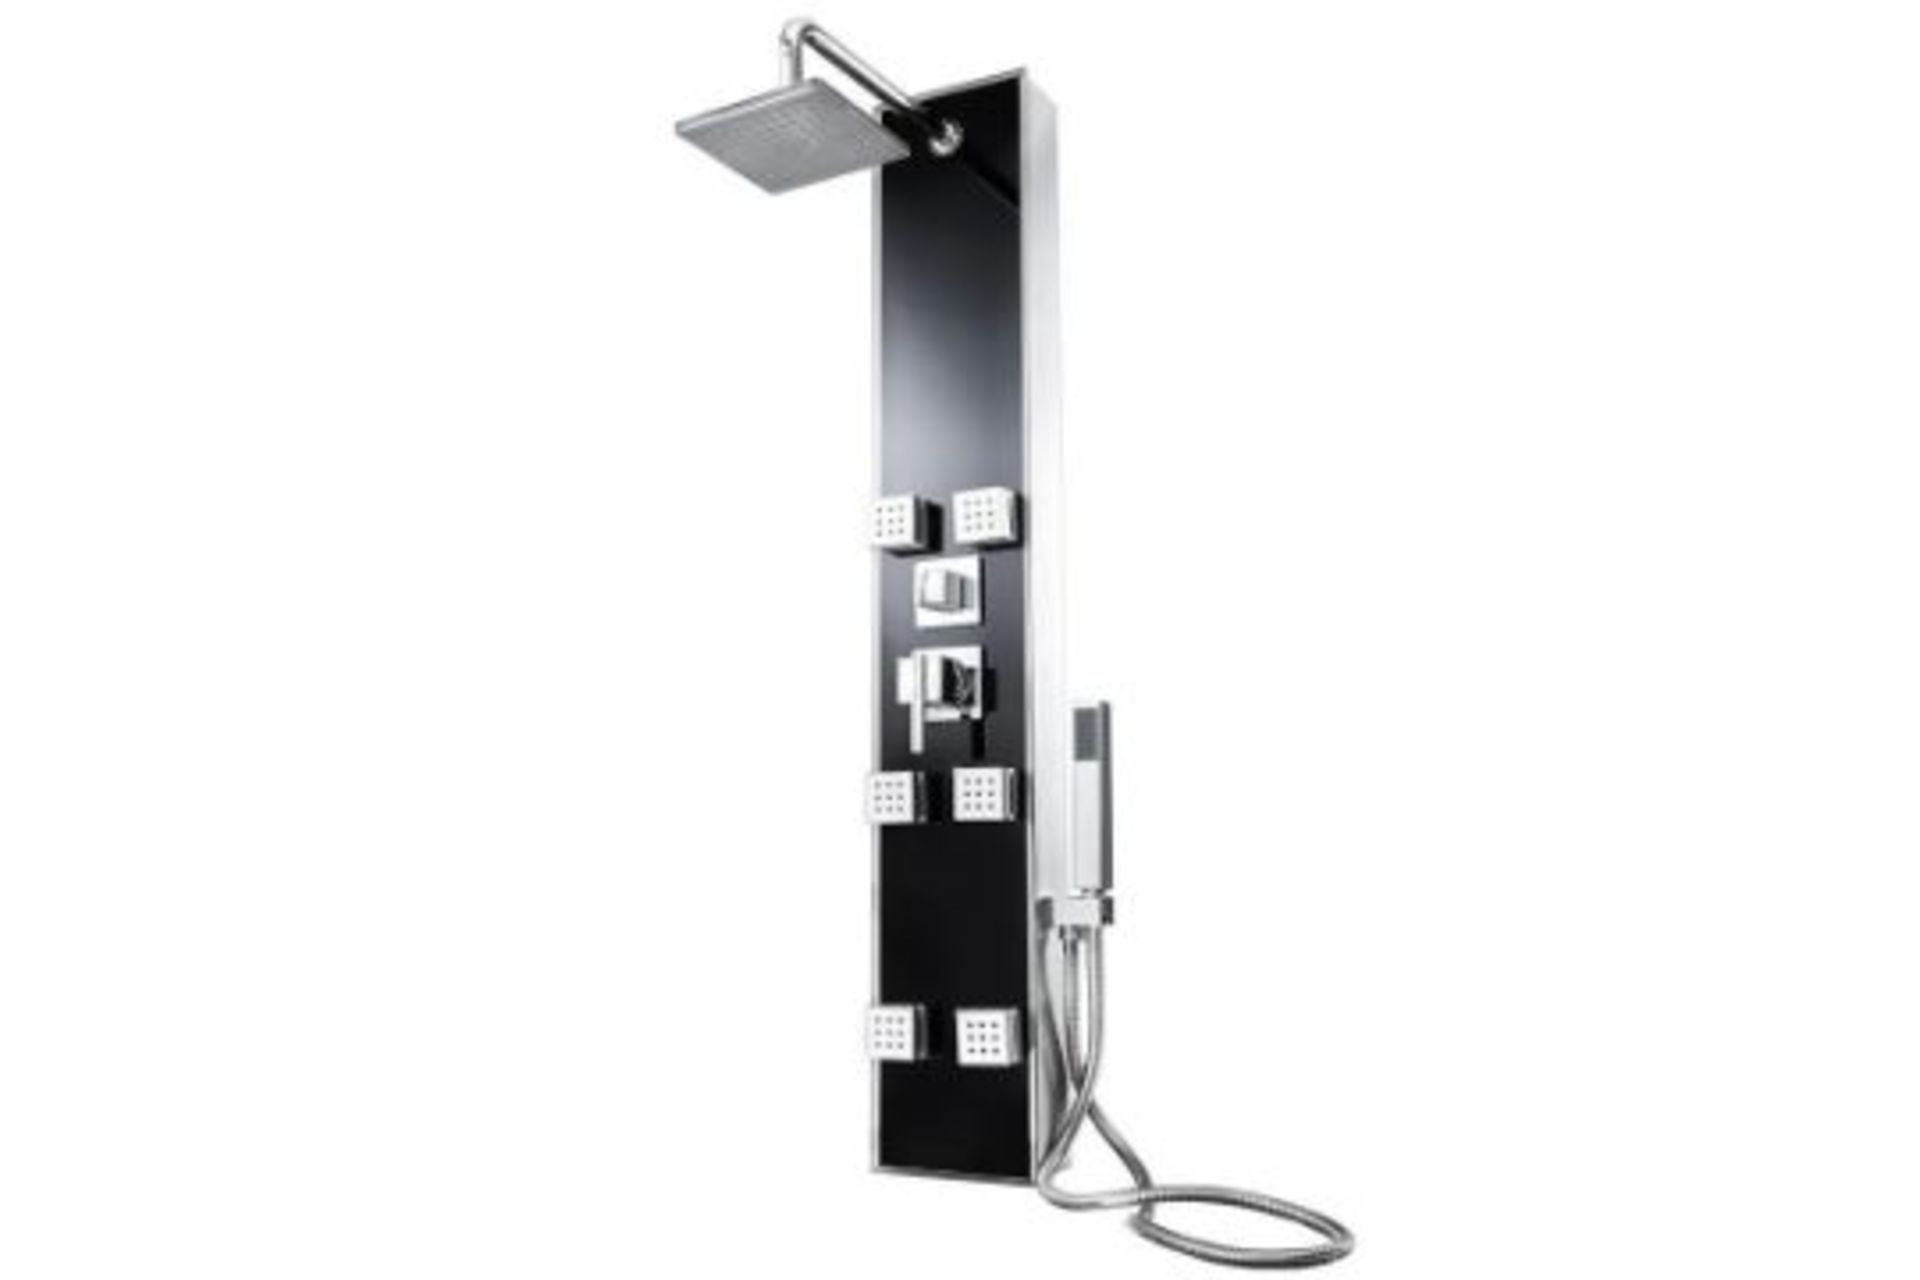 Shower panel with 6 massage jets. - R13A.8. RRP £299.99. This elegant shower panel is an all-in-